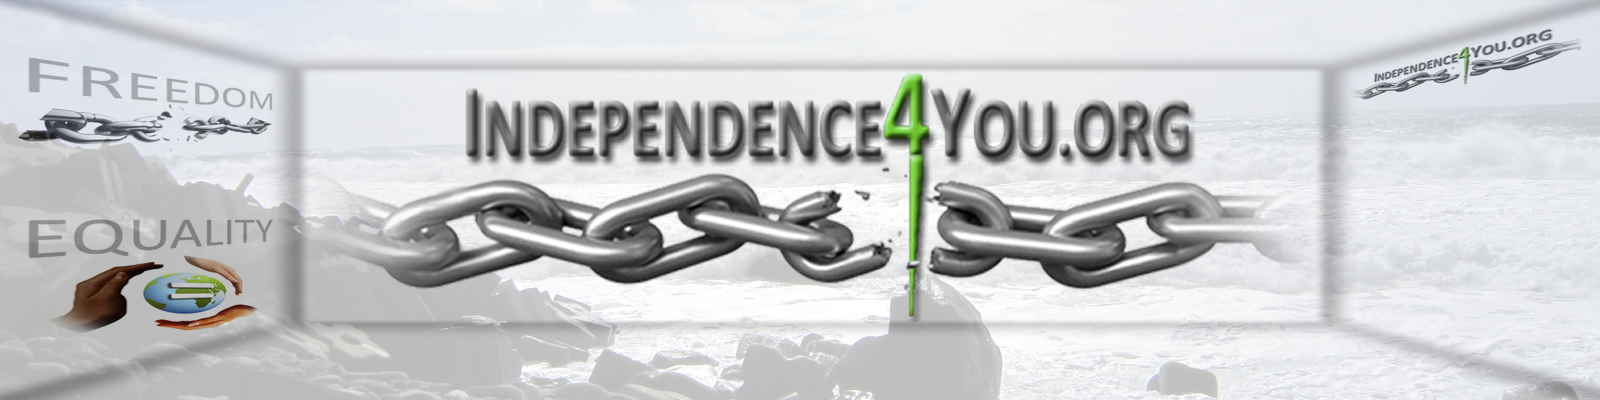 independence4you.org